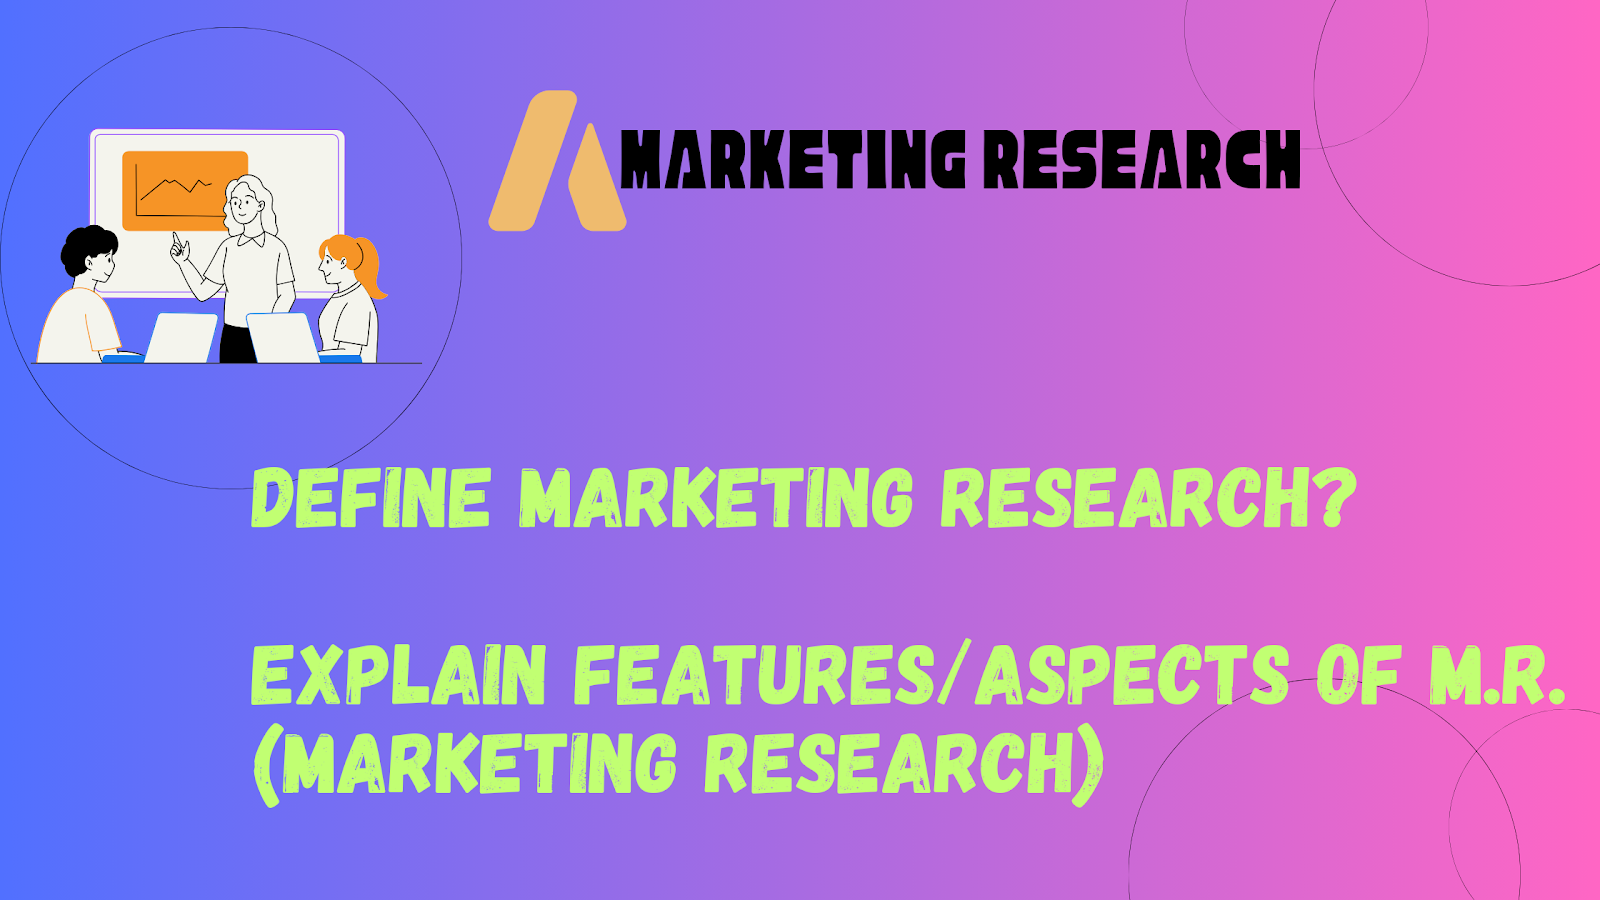 Define Marketing Research? Explain Features/Aspects of M.R. (Marketing Research)